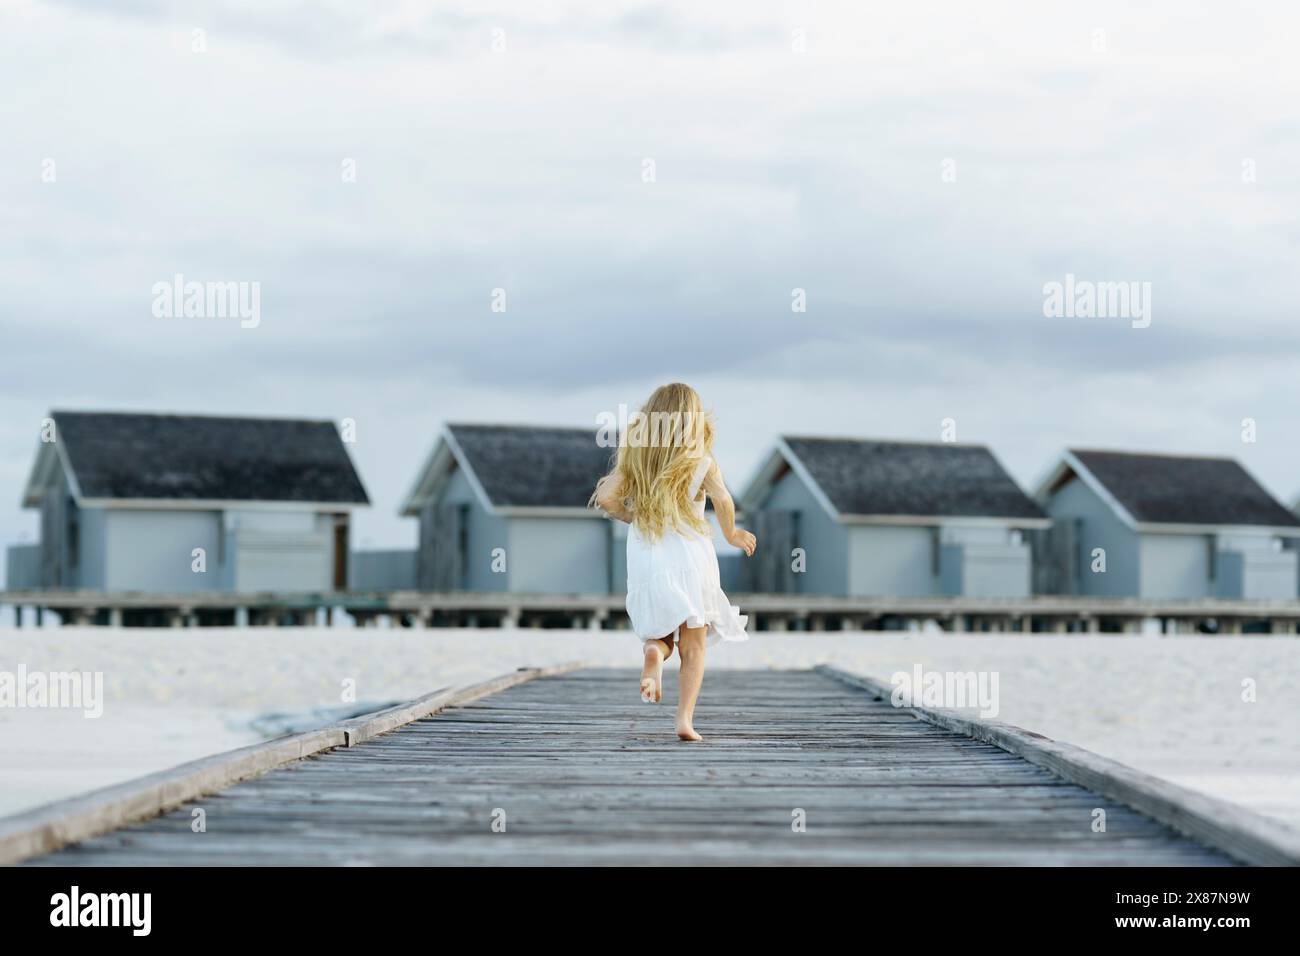 Girl with long blond hair running on jetty at Maldives Stock Photo